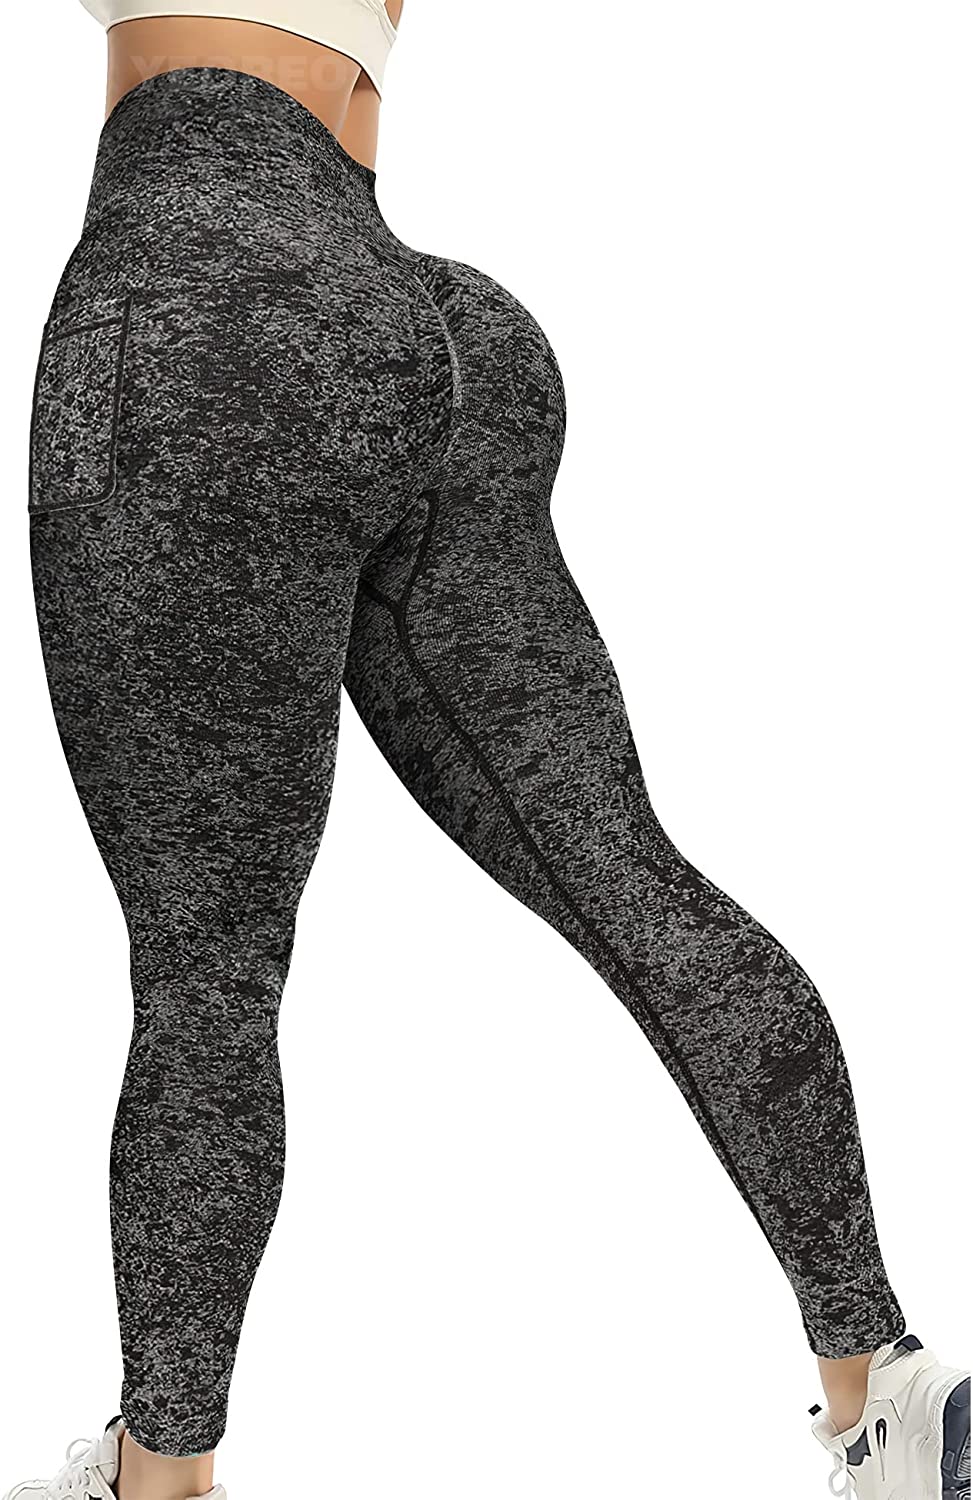 Chifolo Exclusive - SEXY YOGA PANTS High waisted Camo pattern seamless workout  pants. High-rise,no-dig, Non-see-through, wide waistband for no muffin top,  and tummy control. Tight Fit, Lightweight, Comfortable Elastic Waist. This  seamless